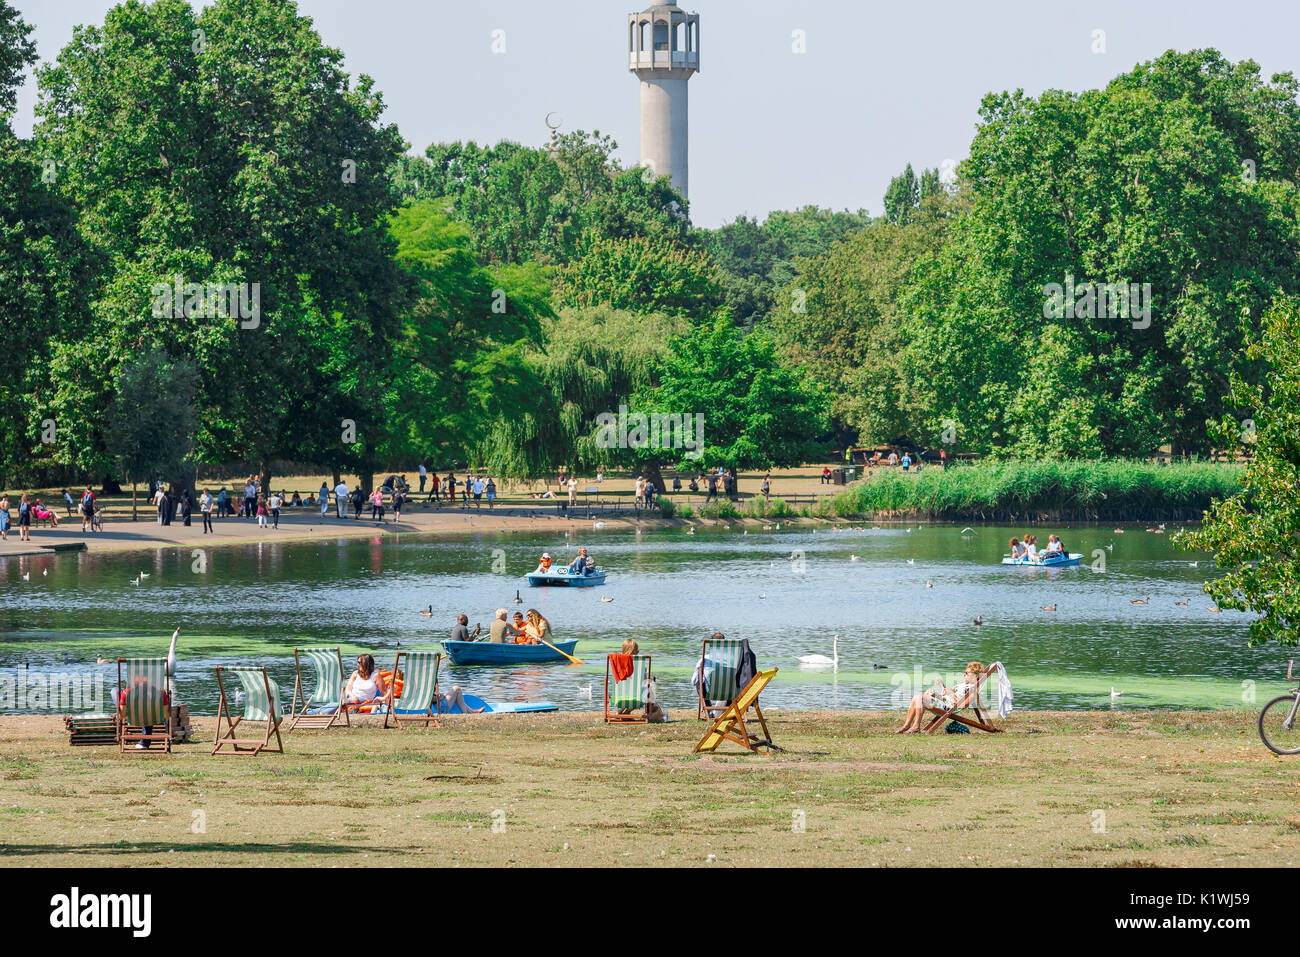 London Regent's Park, view of the the boating lake and tourists enjoying a  summer afternoon with the minaret of the Central Mosque at the rear, UK. Stock Photo